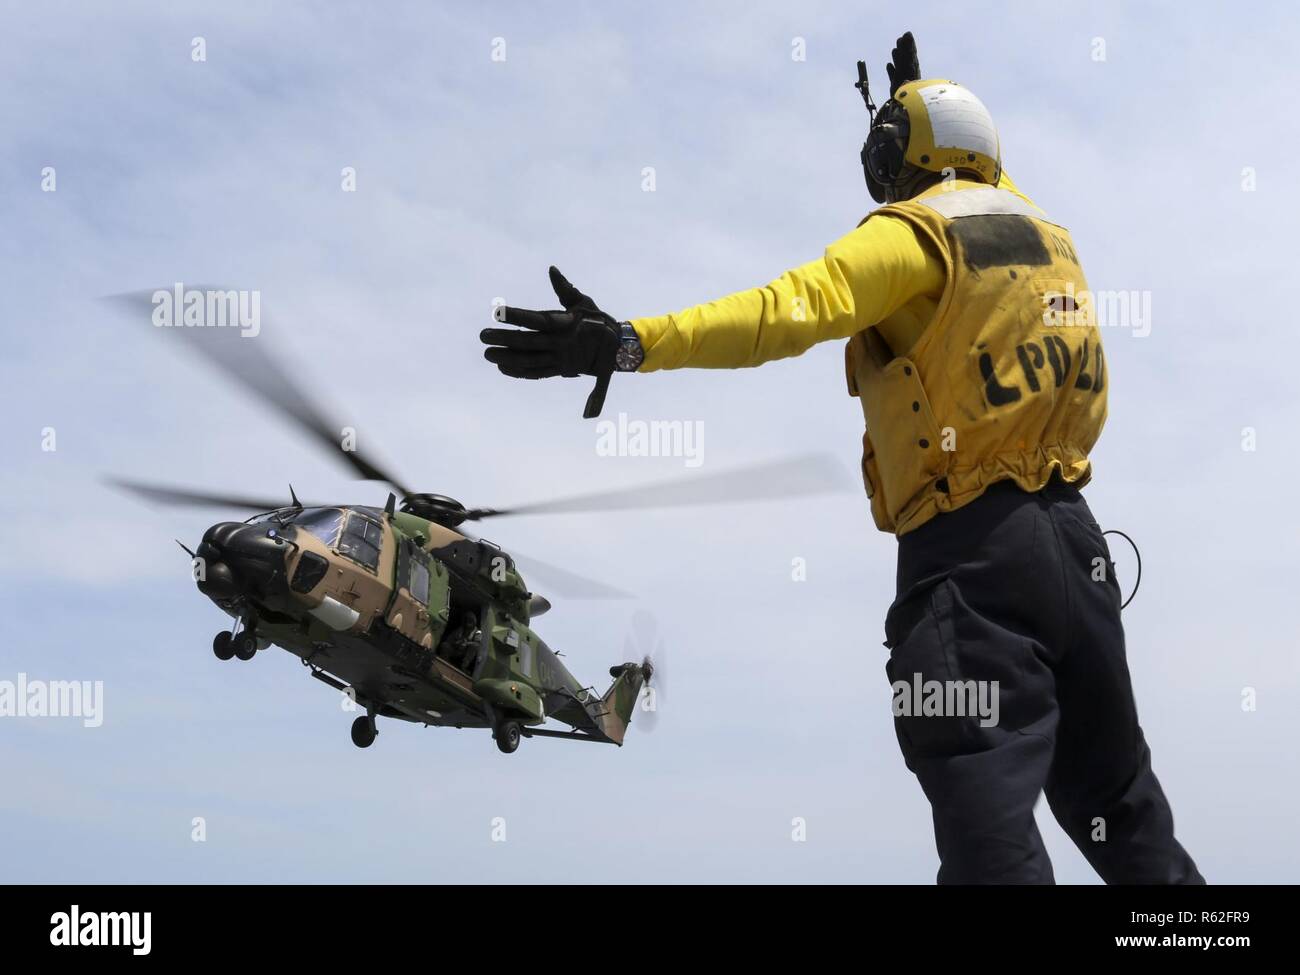 CORAL SEA (Nov. 19, 2018) Aviation Boatswain’s Mate (Handling) Airman Caleb Brawner, from Wichita, Kan., signals a MRH-90 Taipan helicopter, assigned to the Royal Australian Navy helicopter landing dock ship HMAS Adelaide (L01), as it takes off from the flight deck of the amphibious transport dock ship USS Green Bay (LPD 20) during cross deck flight operations. Green Bay, part of Commander Amphibious Squadron 11, is operating in the region to enhance interoperability with partners and serve as a ready-response force for any type of contingency. Stock Photo